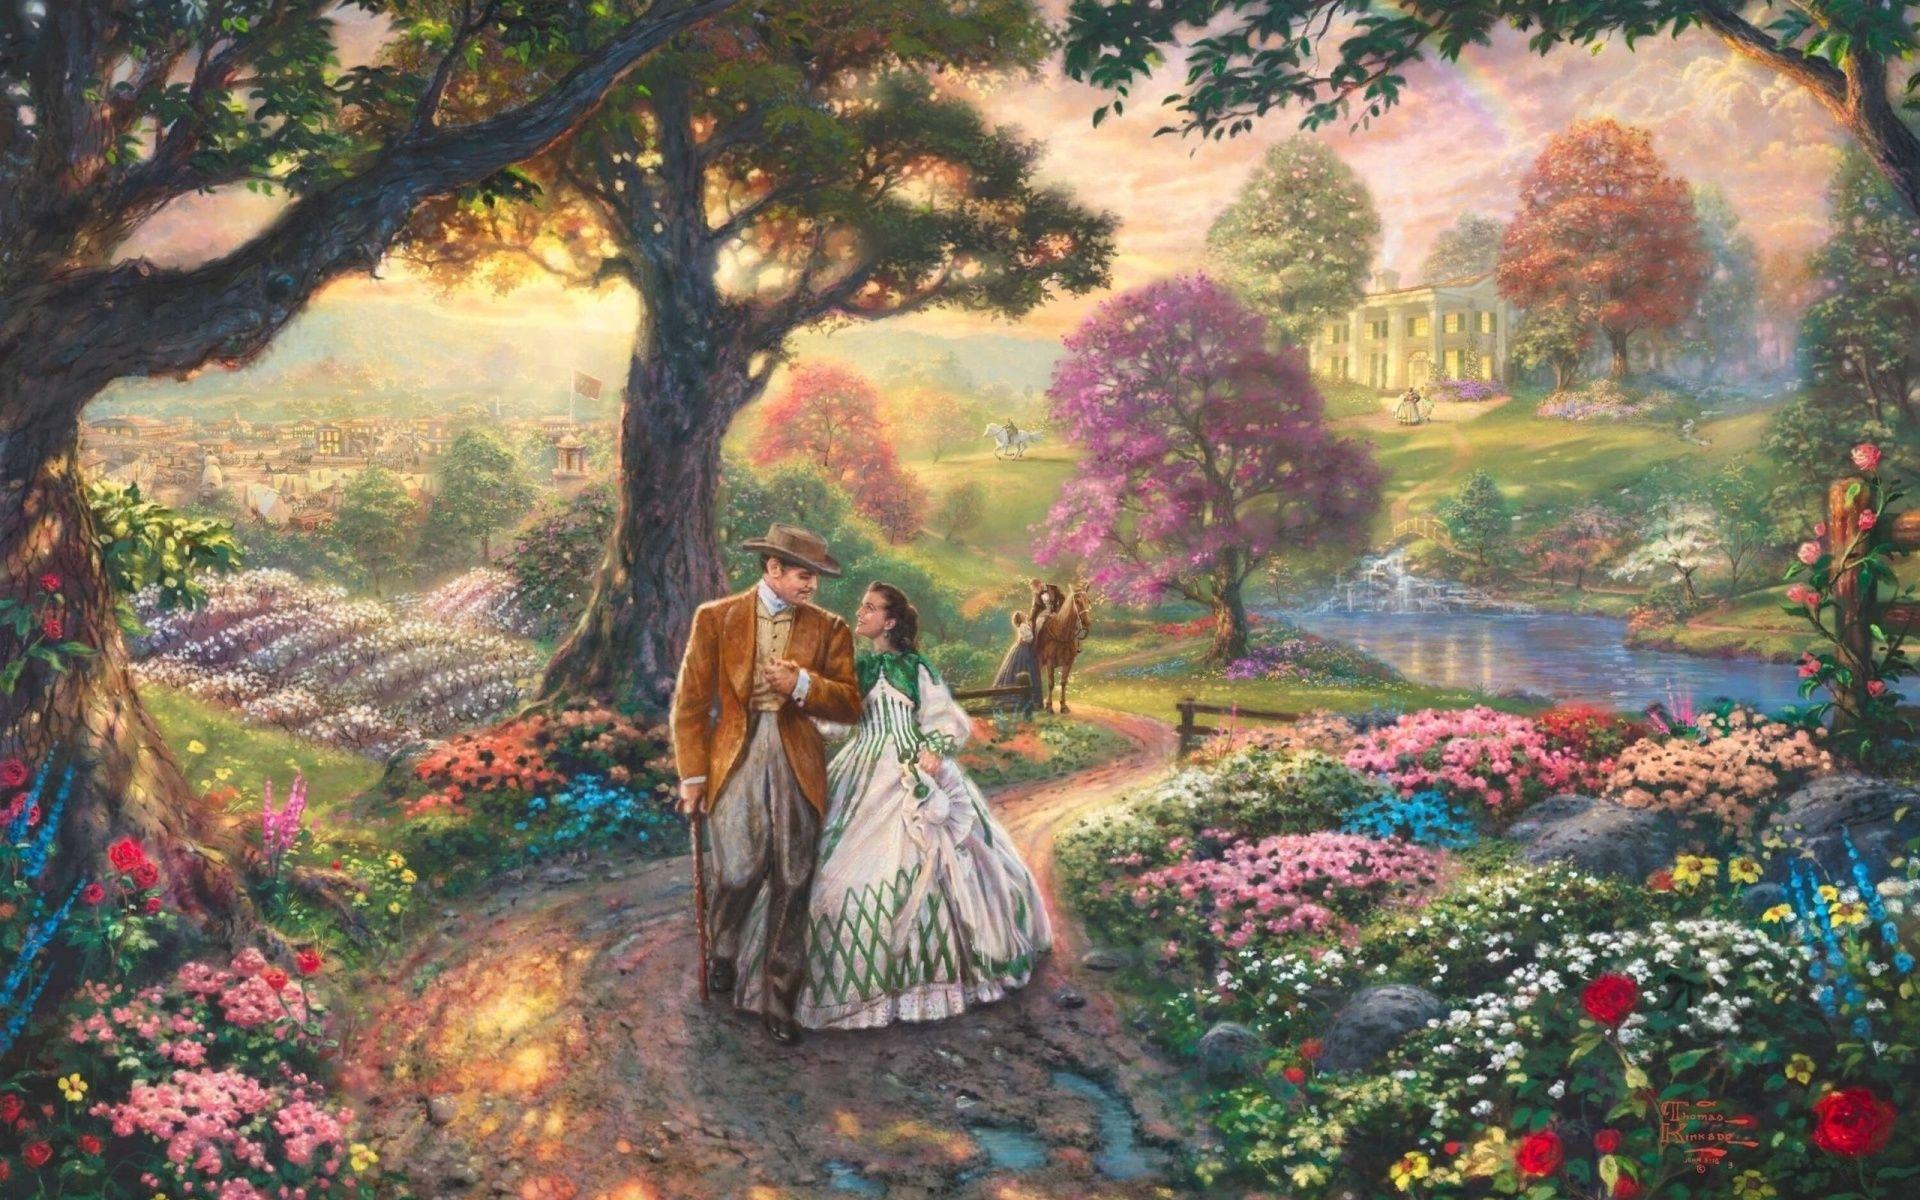 Gone With The Wind, Thomas Kinkade Wallpaper, Painting